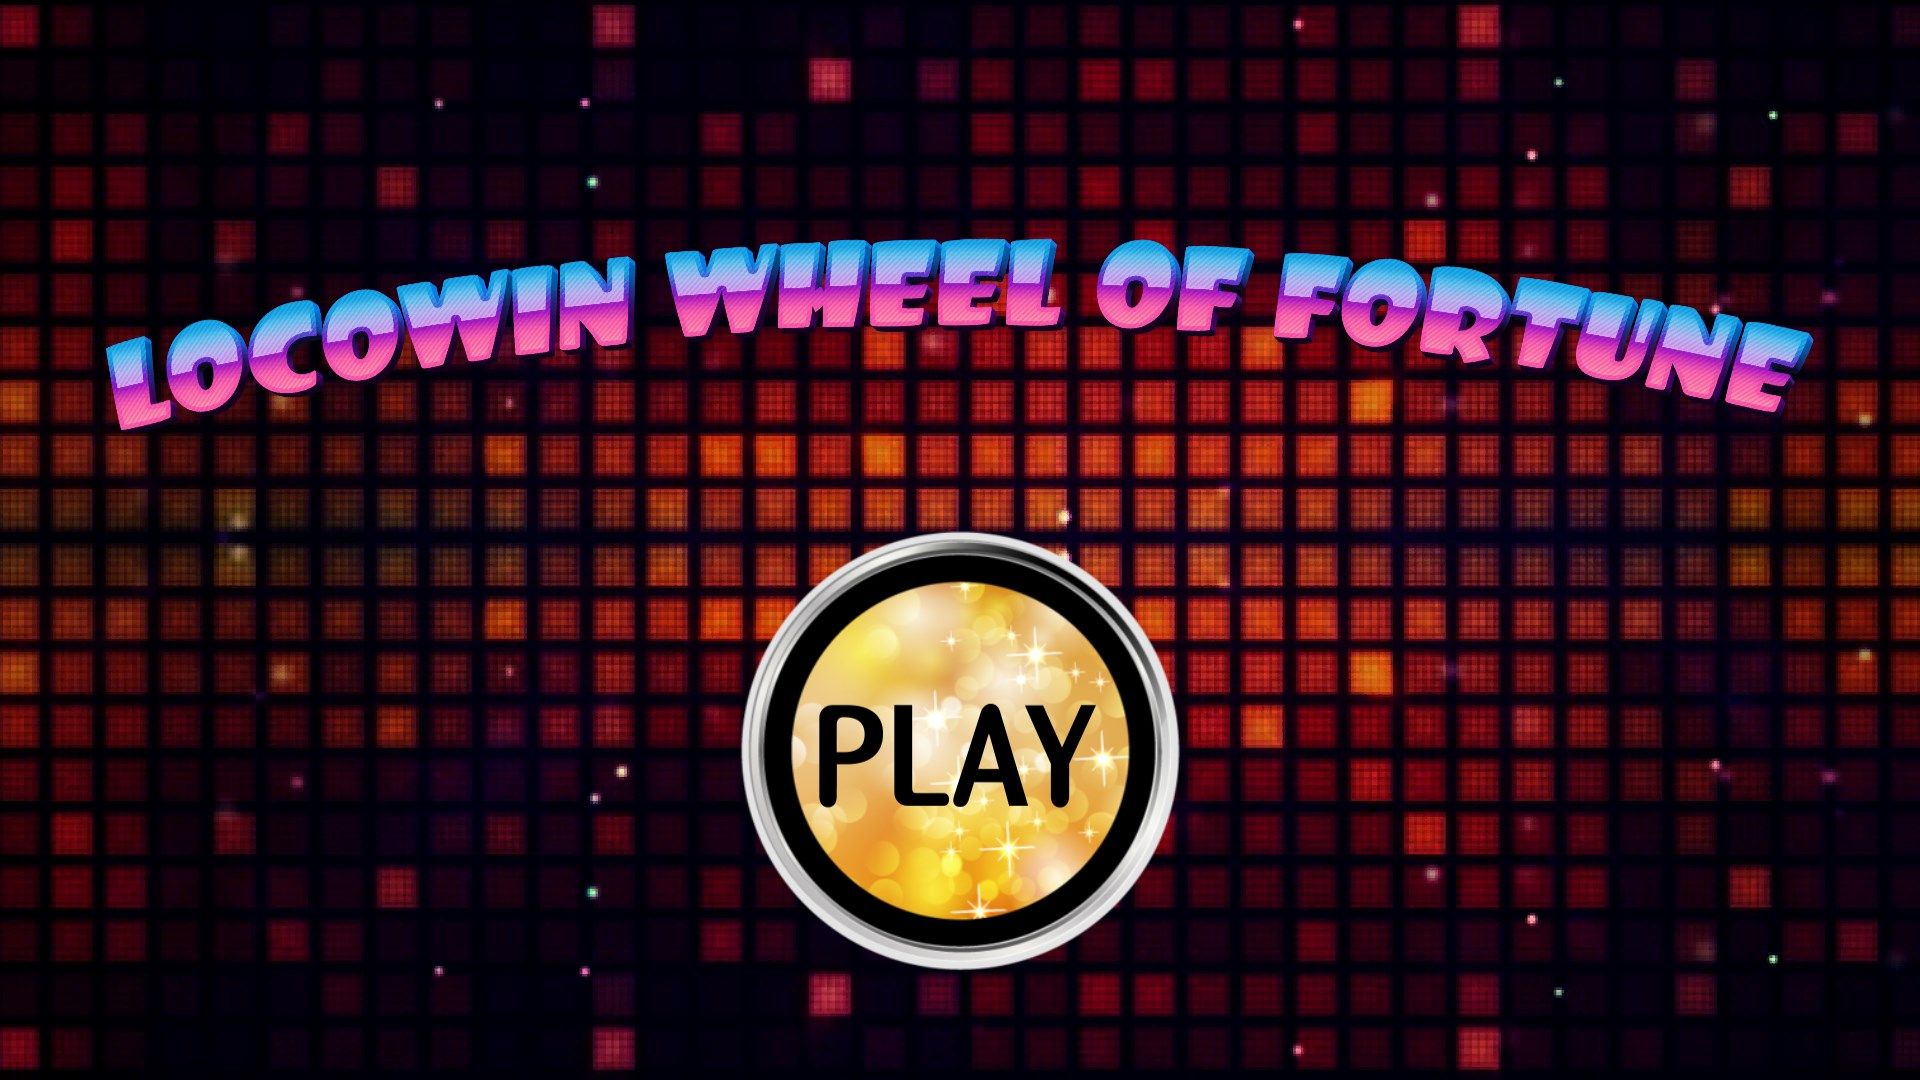 Locowin Wheel of Fortune